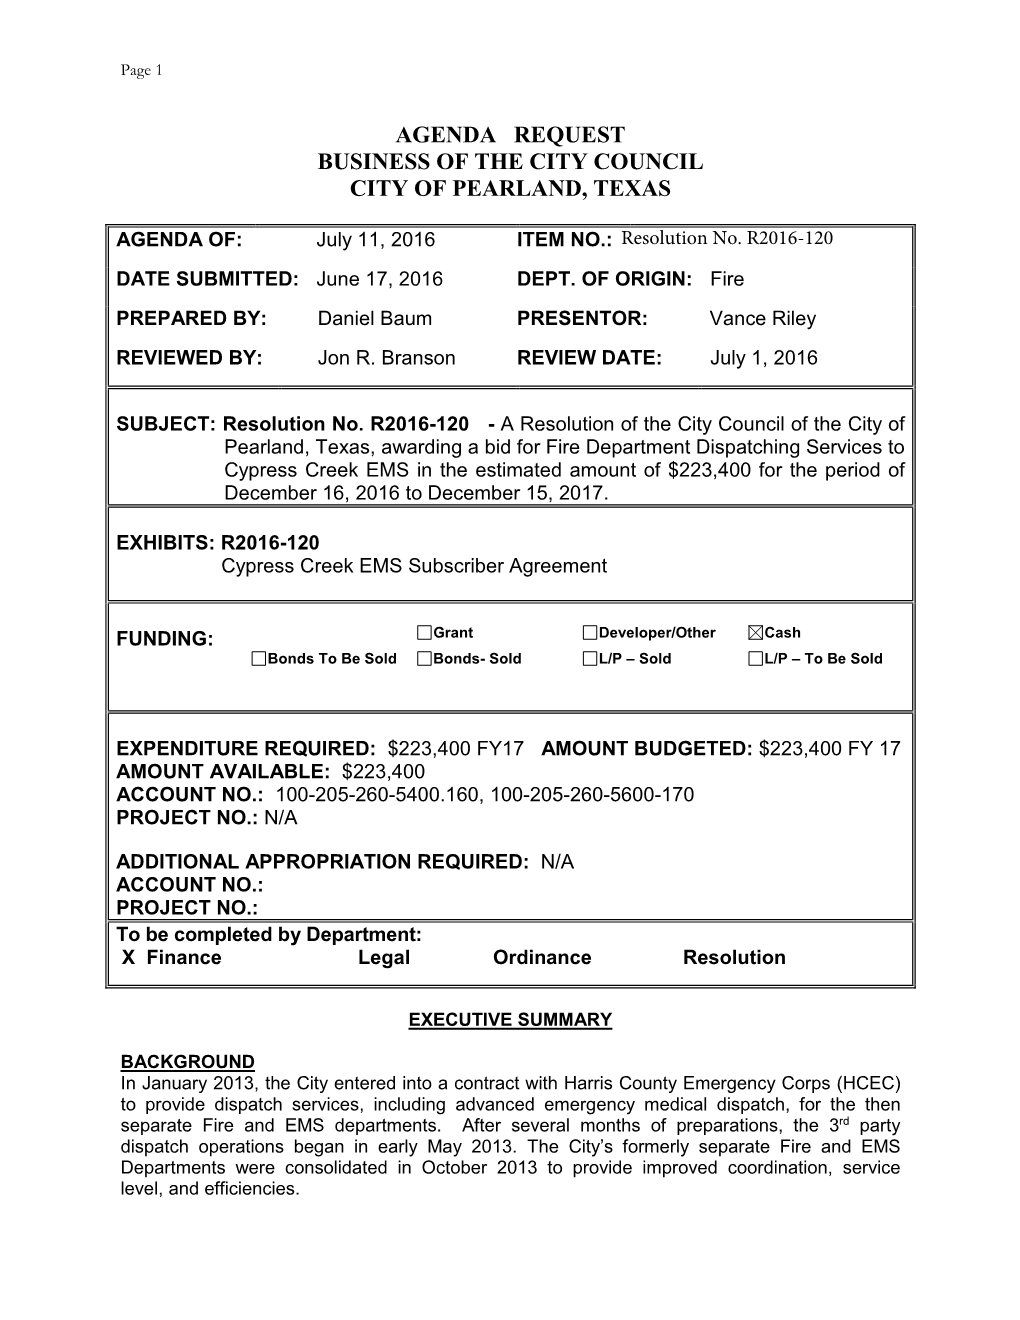 Agenda Request Business of the City Council City of Pearland, Texas